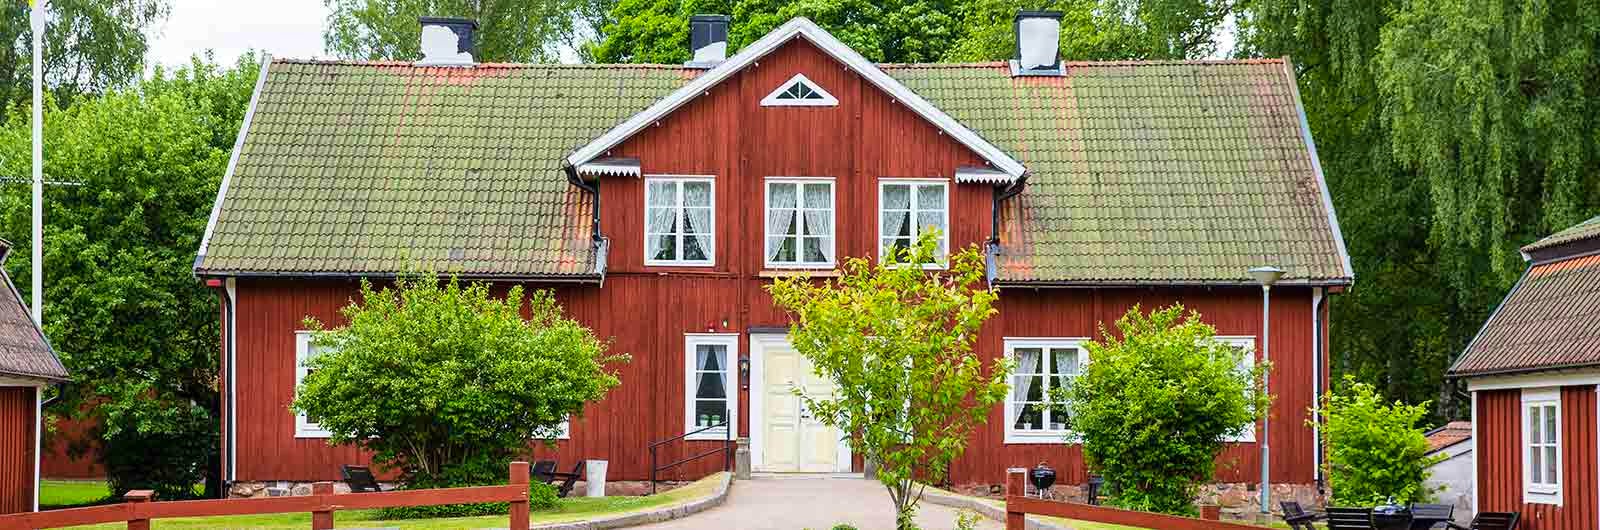 Hostel in a red wooden house